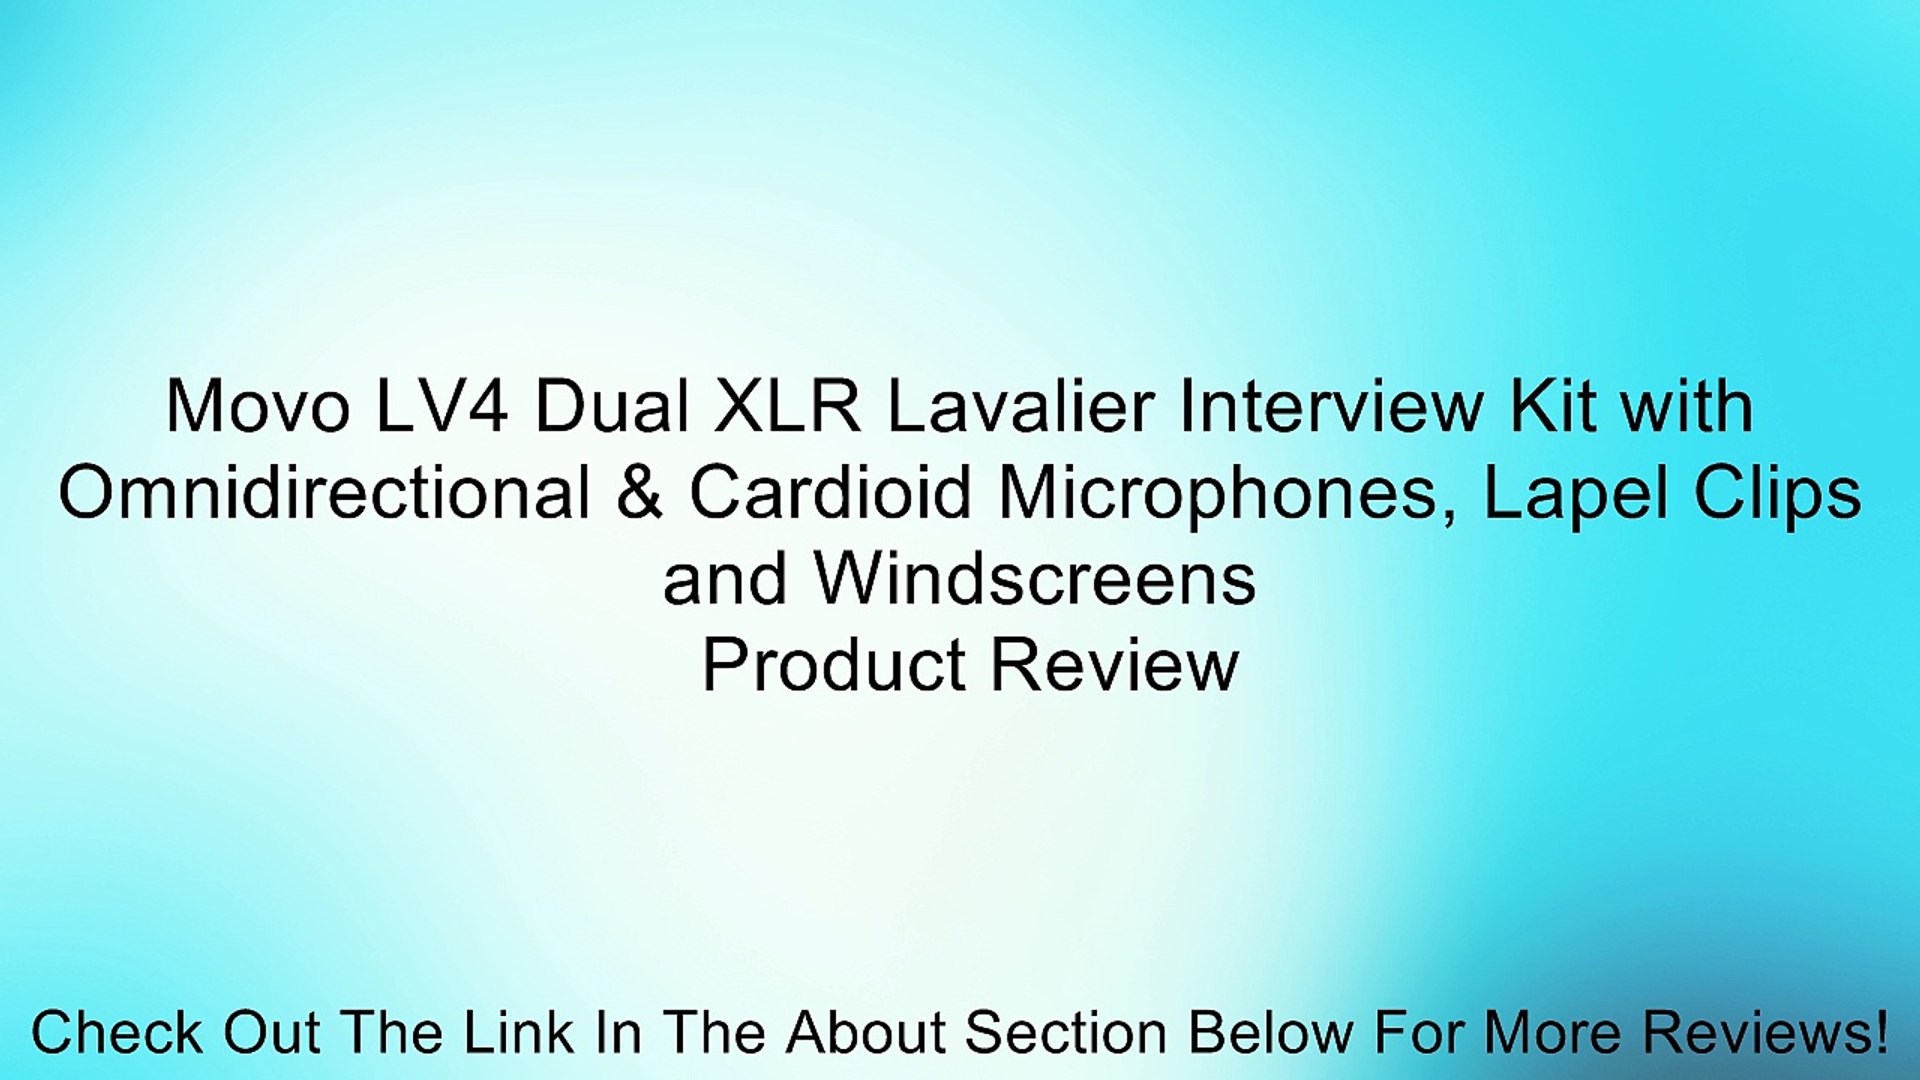 Movo Lv4 Dual Xlr Lavalier Interview Kit With Omnidirectional